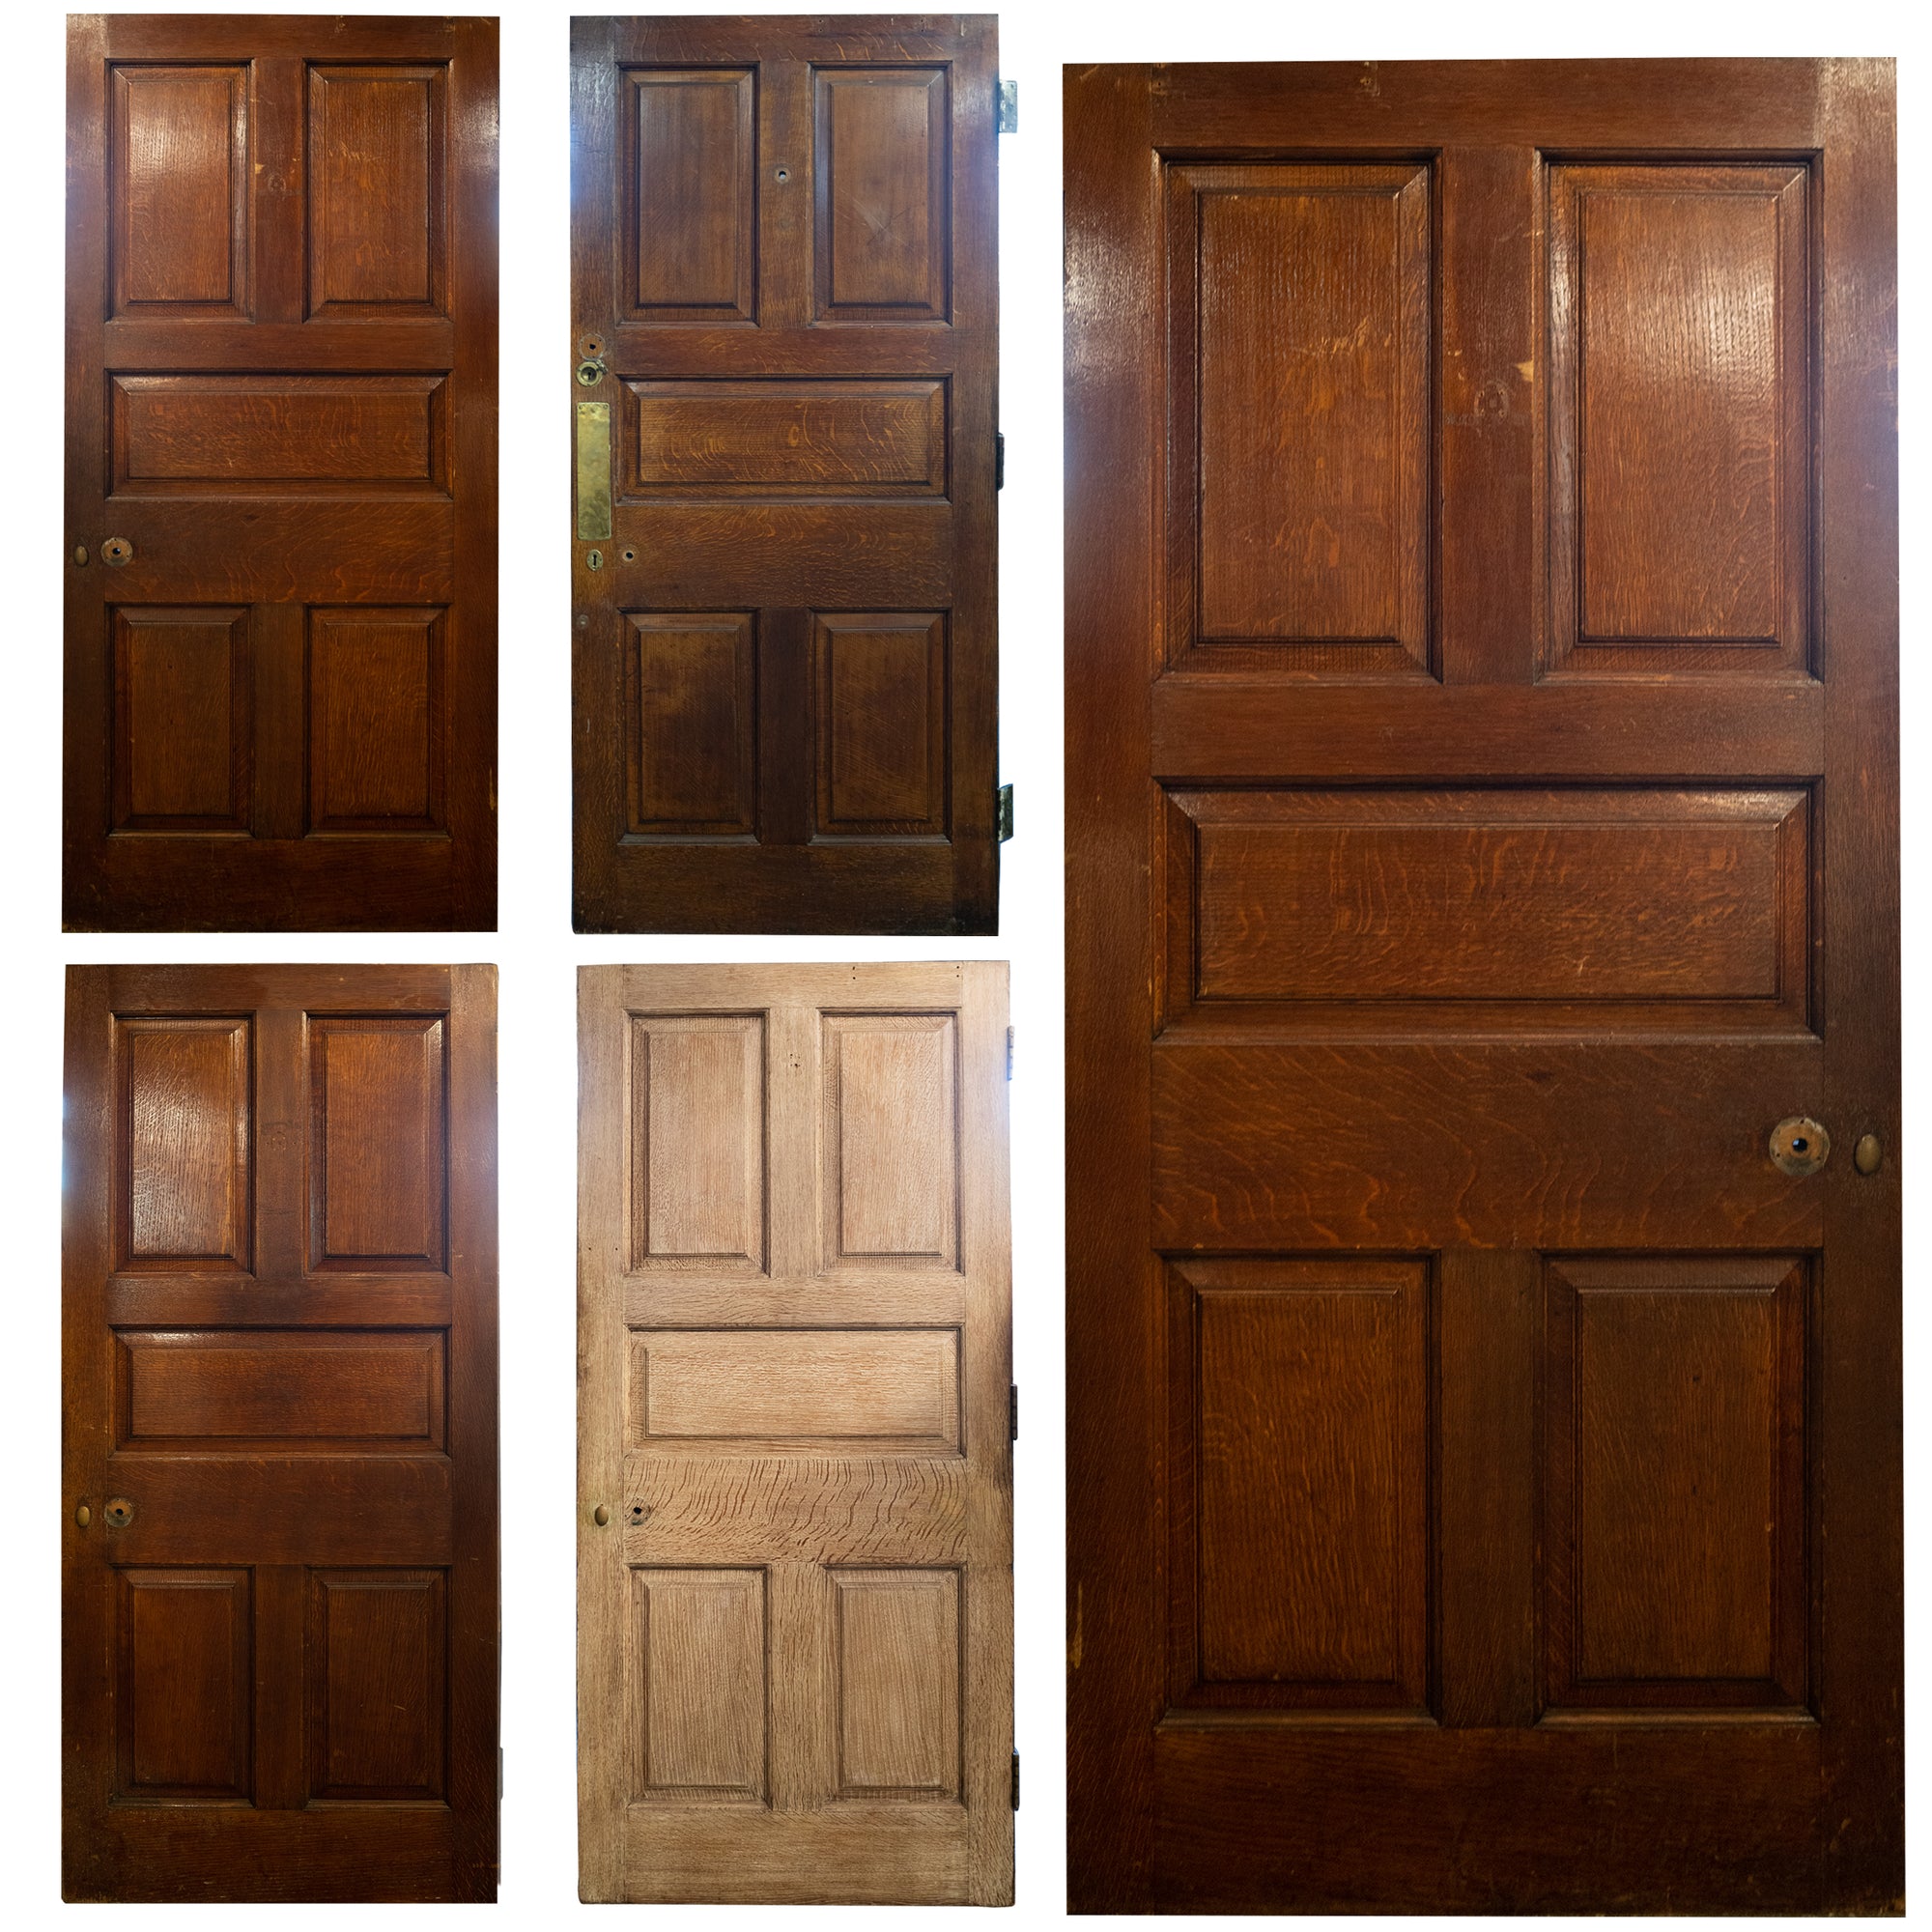 Splendid Solid Oak Doors Reclaimed from Mercers' Hall London | The Architectural Forum